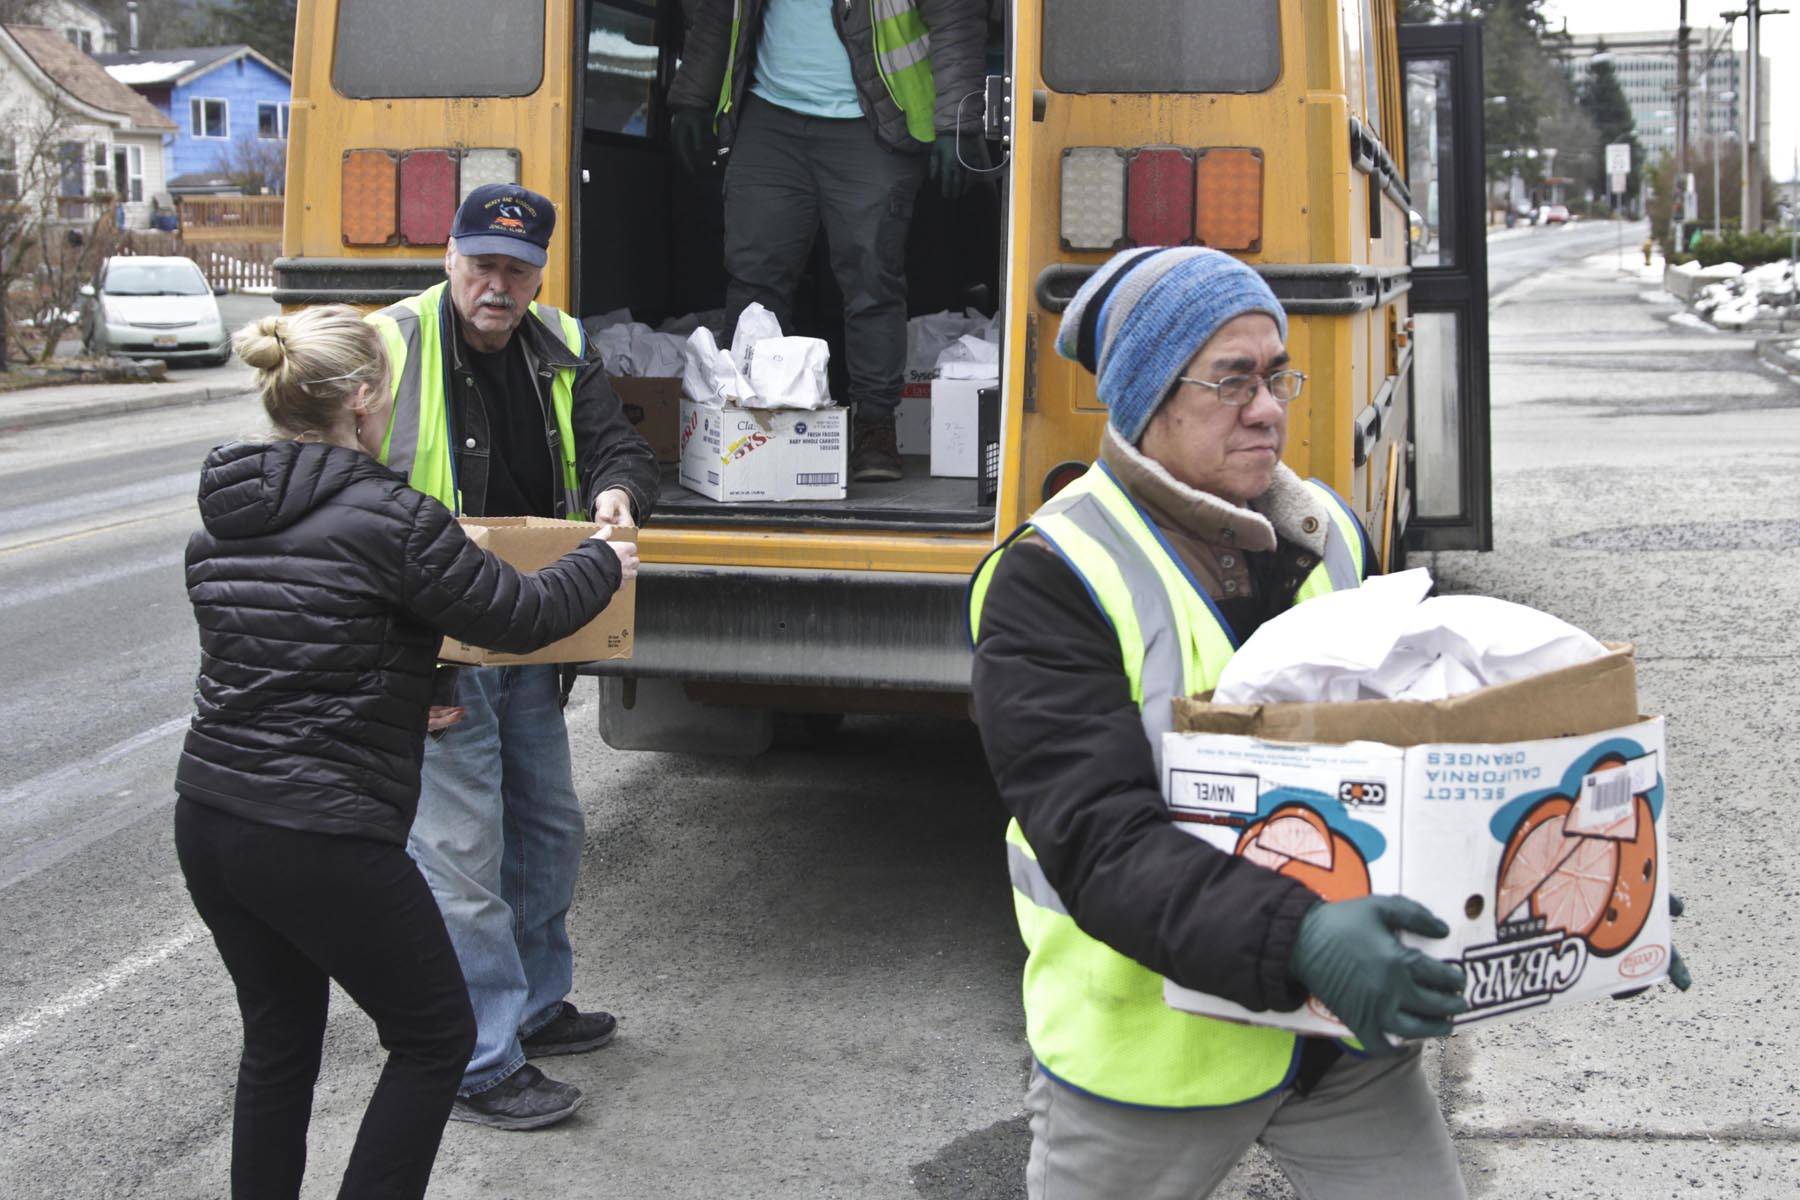 First Student employees and Juneau School District food services supervisor Adrianne Schwartz, left, carry student meals off the bus they’re being distributed from near Juneau-Douglas High School: Yadaa.at Kalé March 16, 2020. (Michael S. Lockett | Juneau Empire)